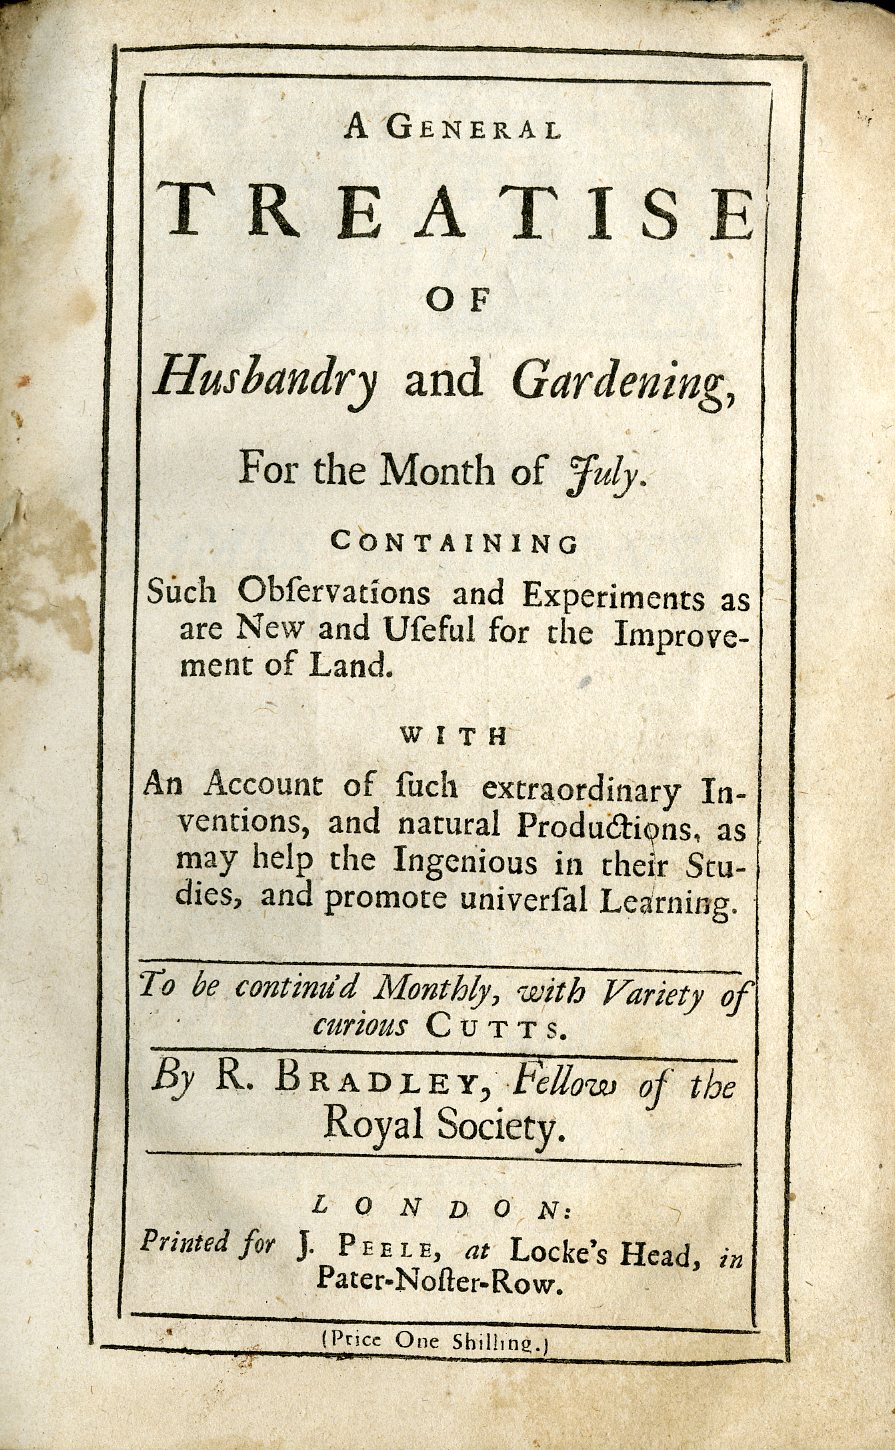 Bradley (Richard) A General Treatise of Husbandry and Gardening, for the Month of July,